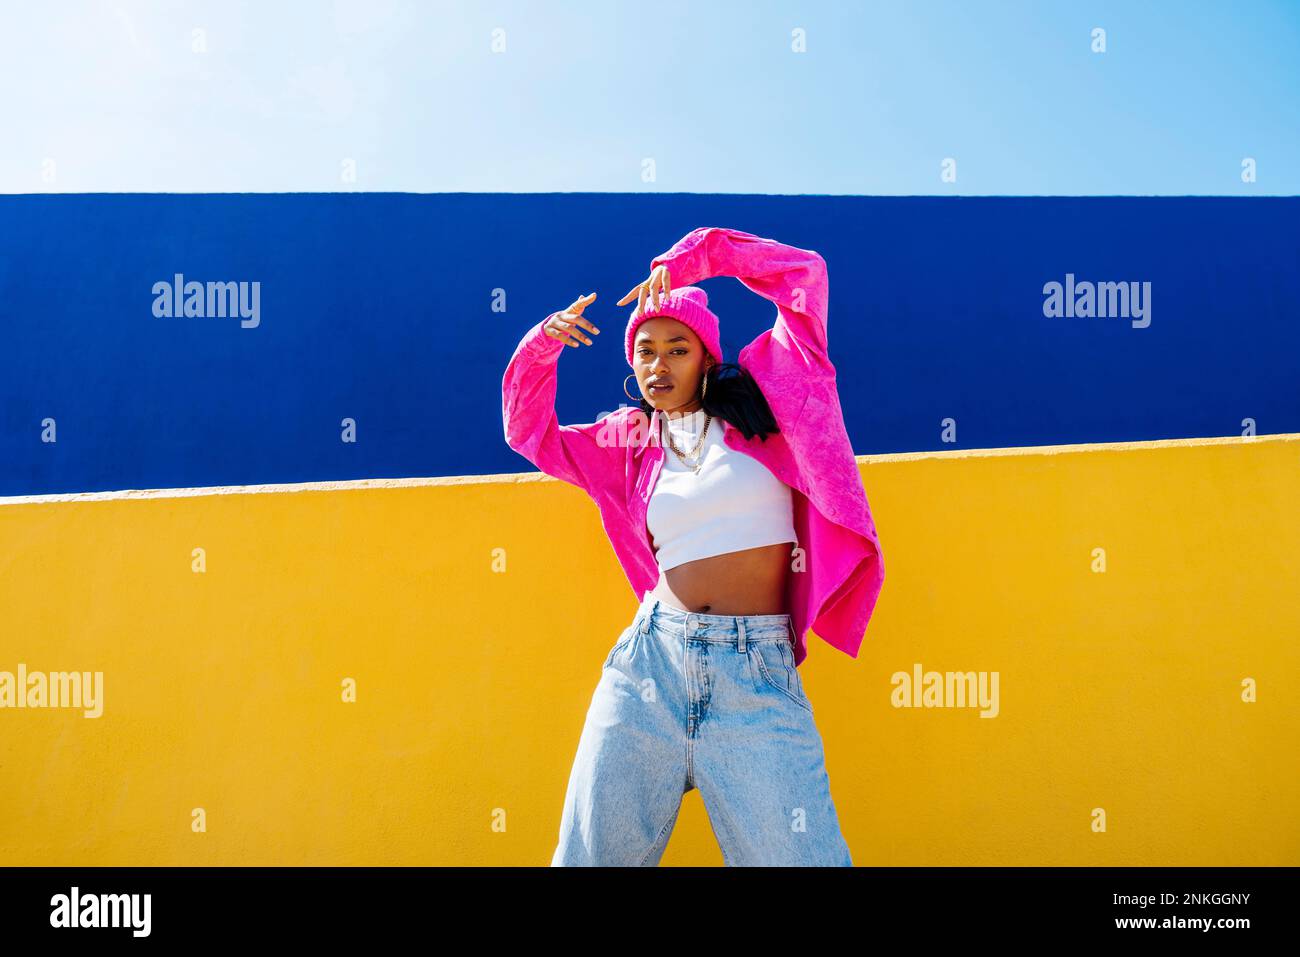 Young woman with cool attitude dancing in front of yellow wall Stock Photo